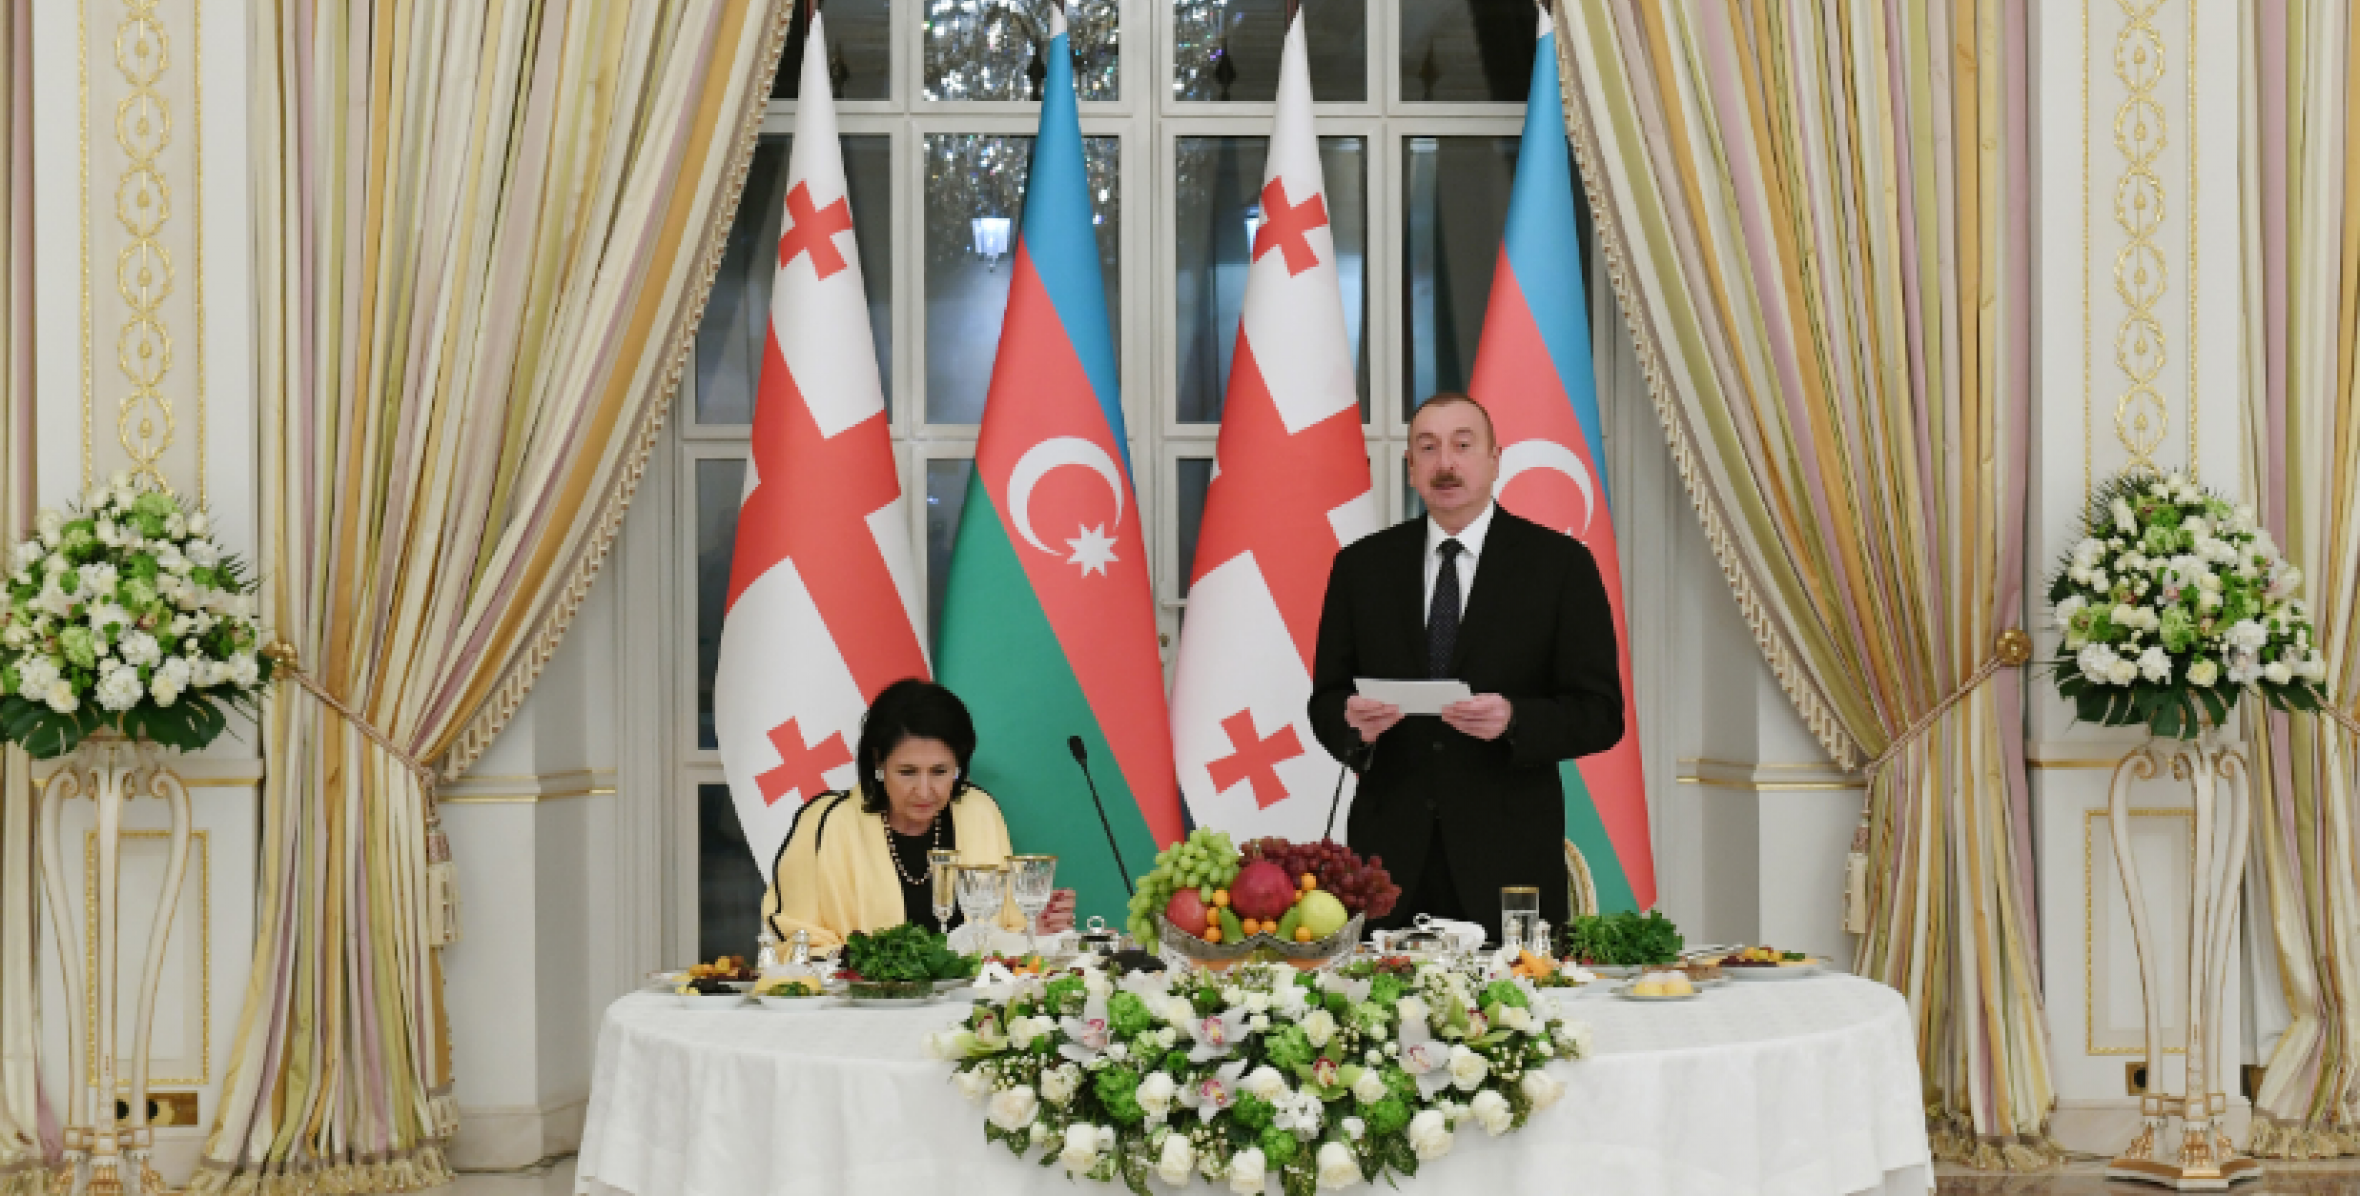 Ilham Aliyev hosted official reception in honor of Georgian President Salome Zourabichvili